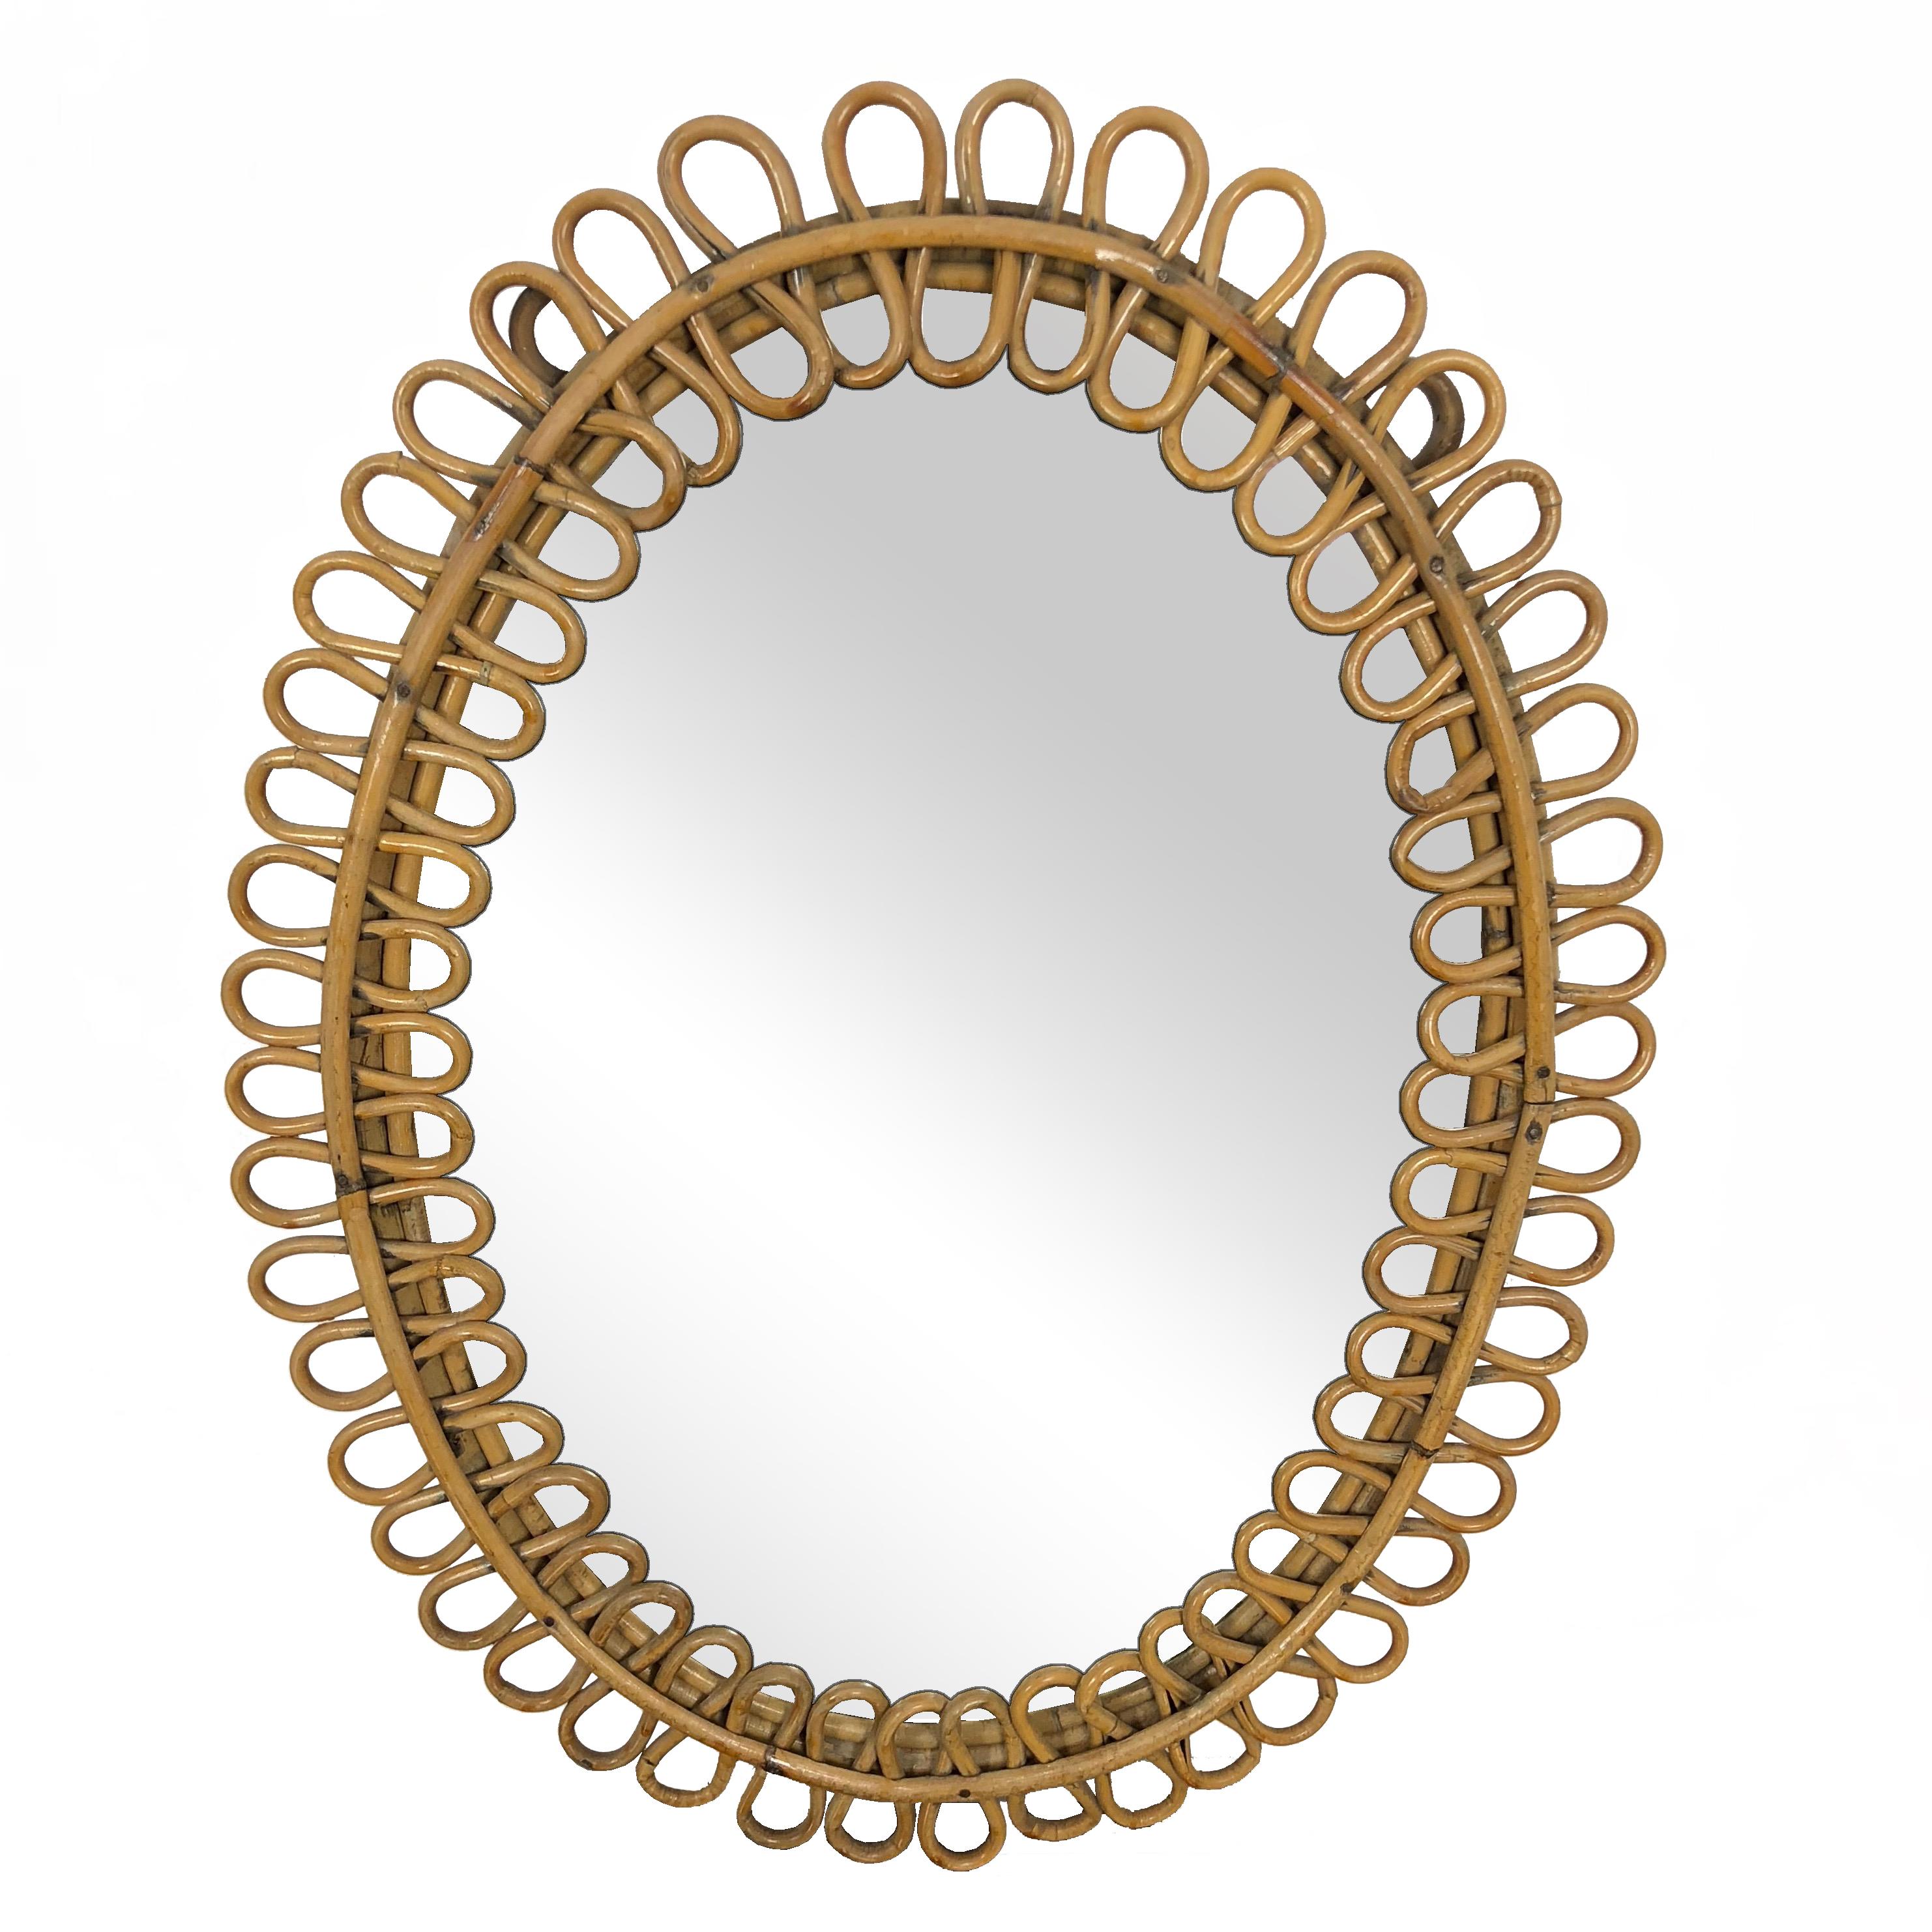 Charming French Riviera rattan mirror. The undulating border is reminiscent of many Jean Royère designs.